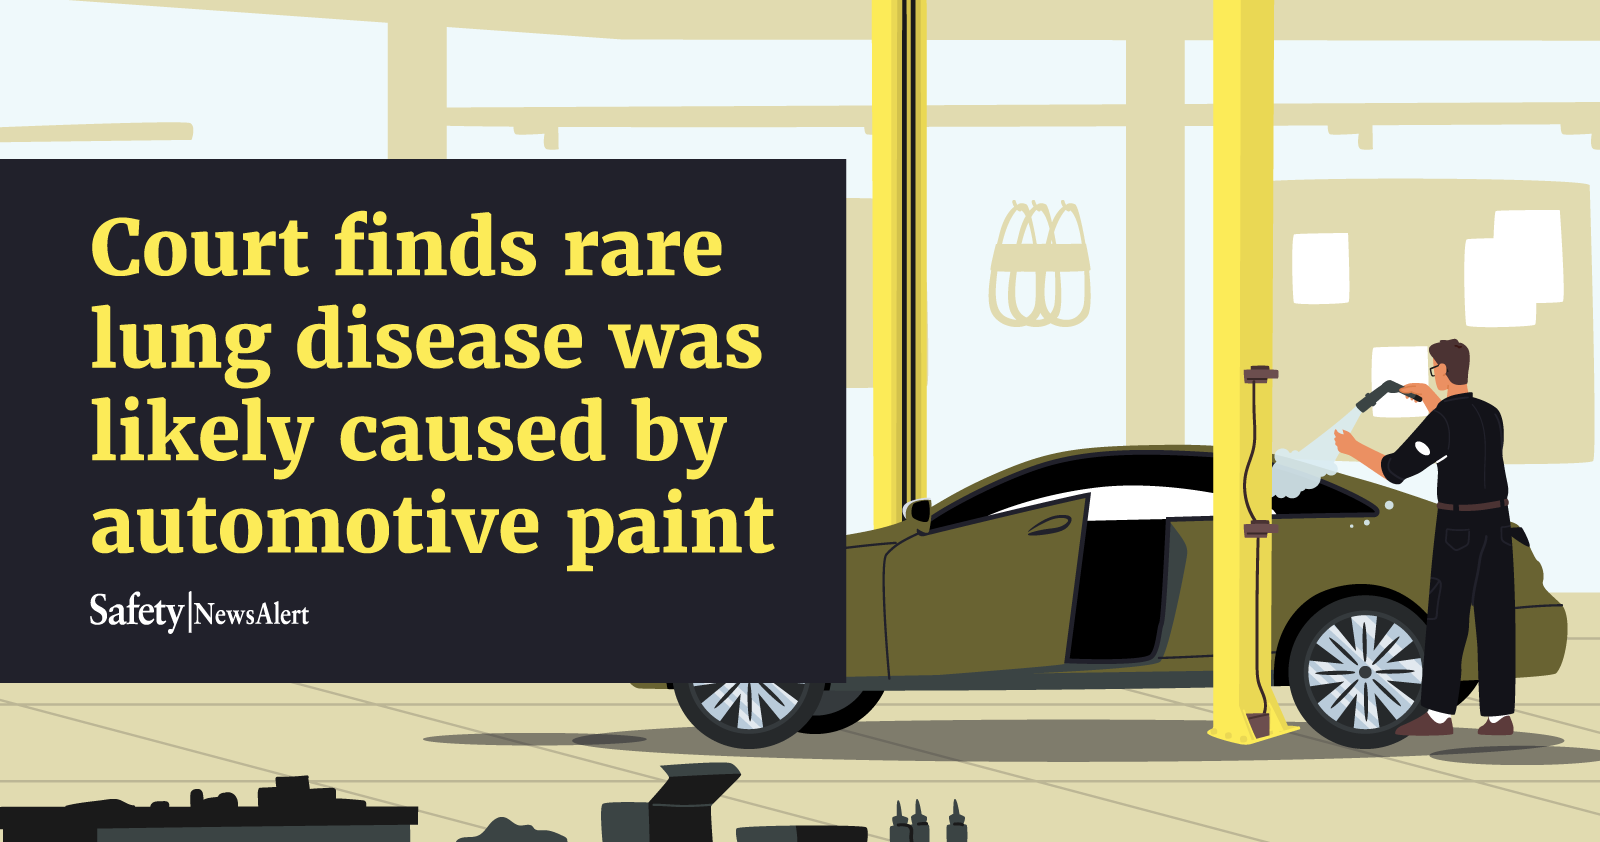 Court finds lung disease like caused by automotive paint